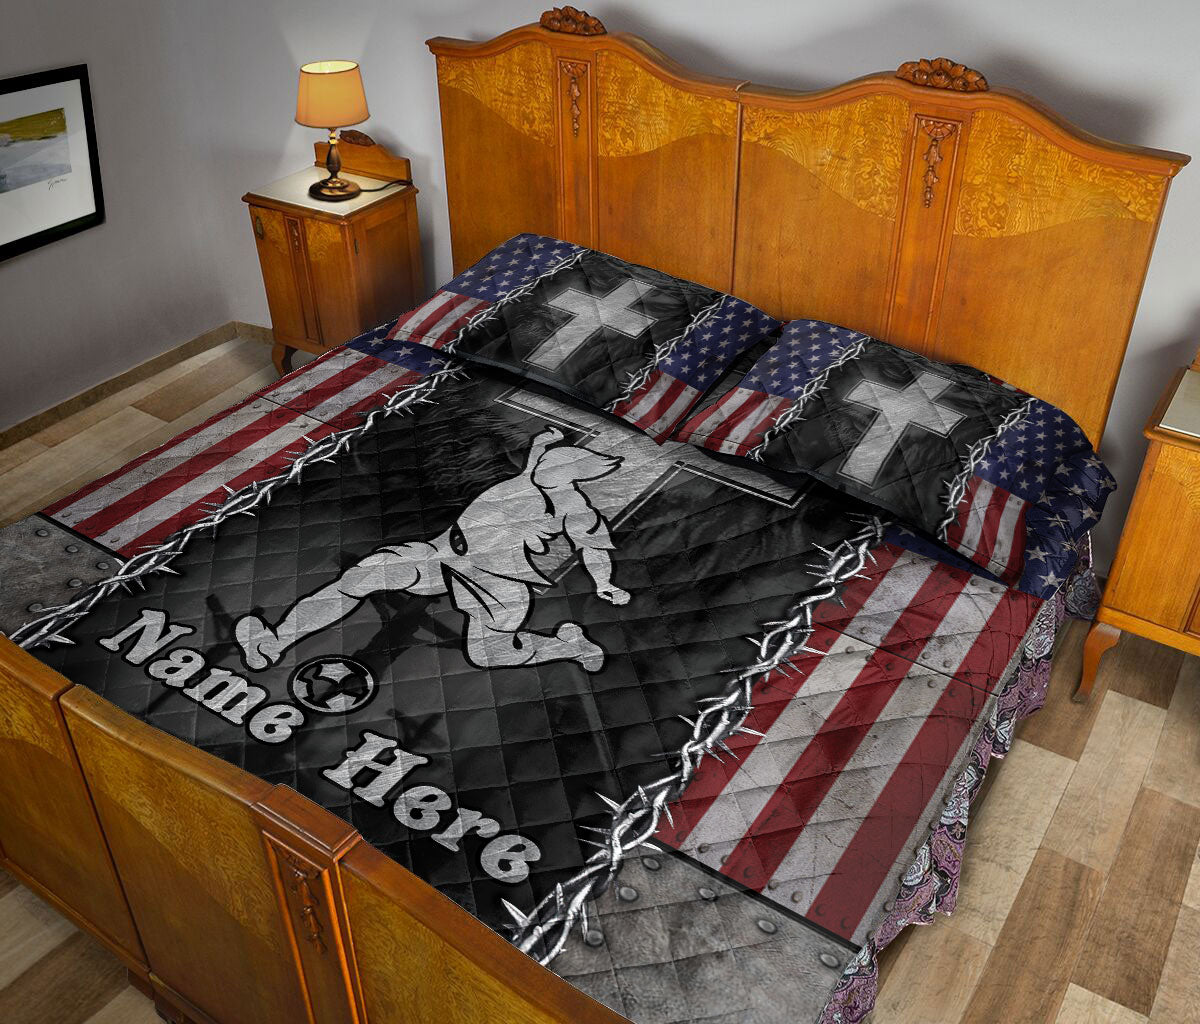 Ohaprints-Quilt-Bed-Set-Pillowcase-Soccer-God-Jesus-Cross-American-Us-Flag-Christian-Custom-Personalized-Name-Blanket-Bedspread-Bedding-1527-Queen (80'' x 90'')